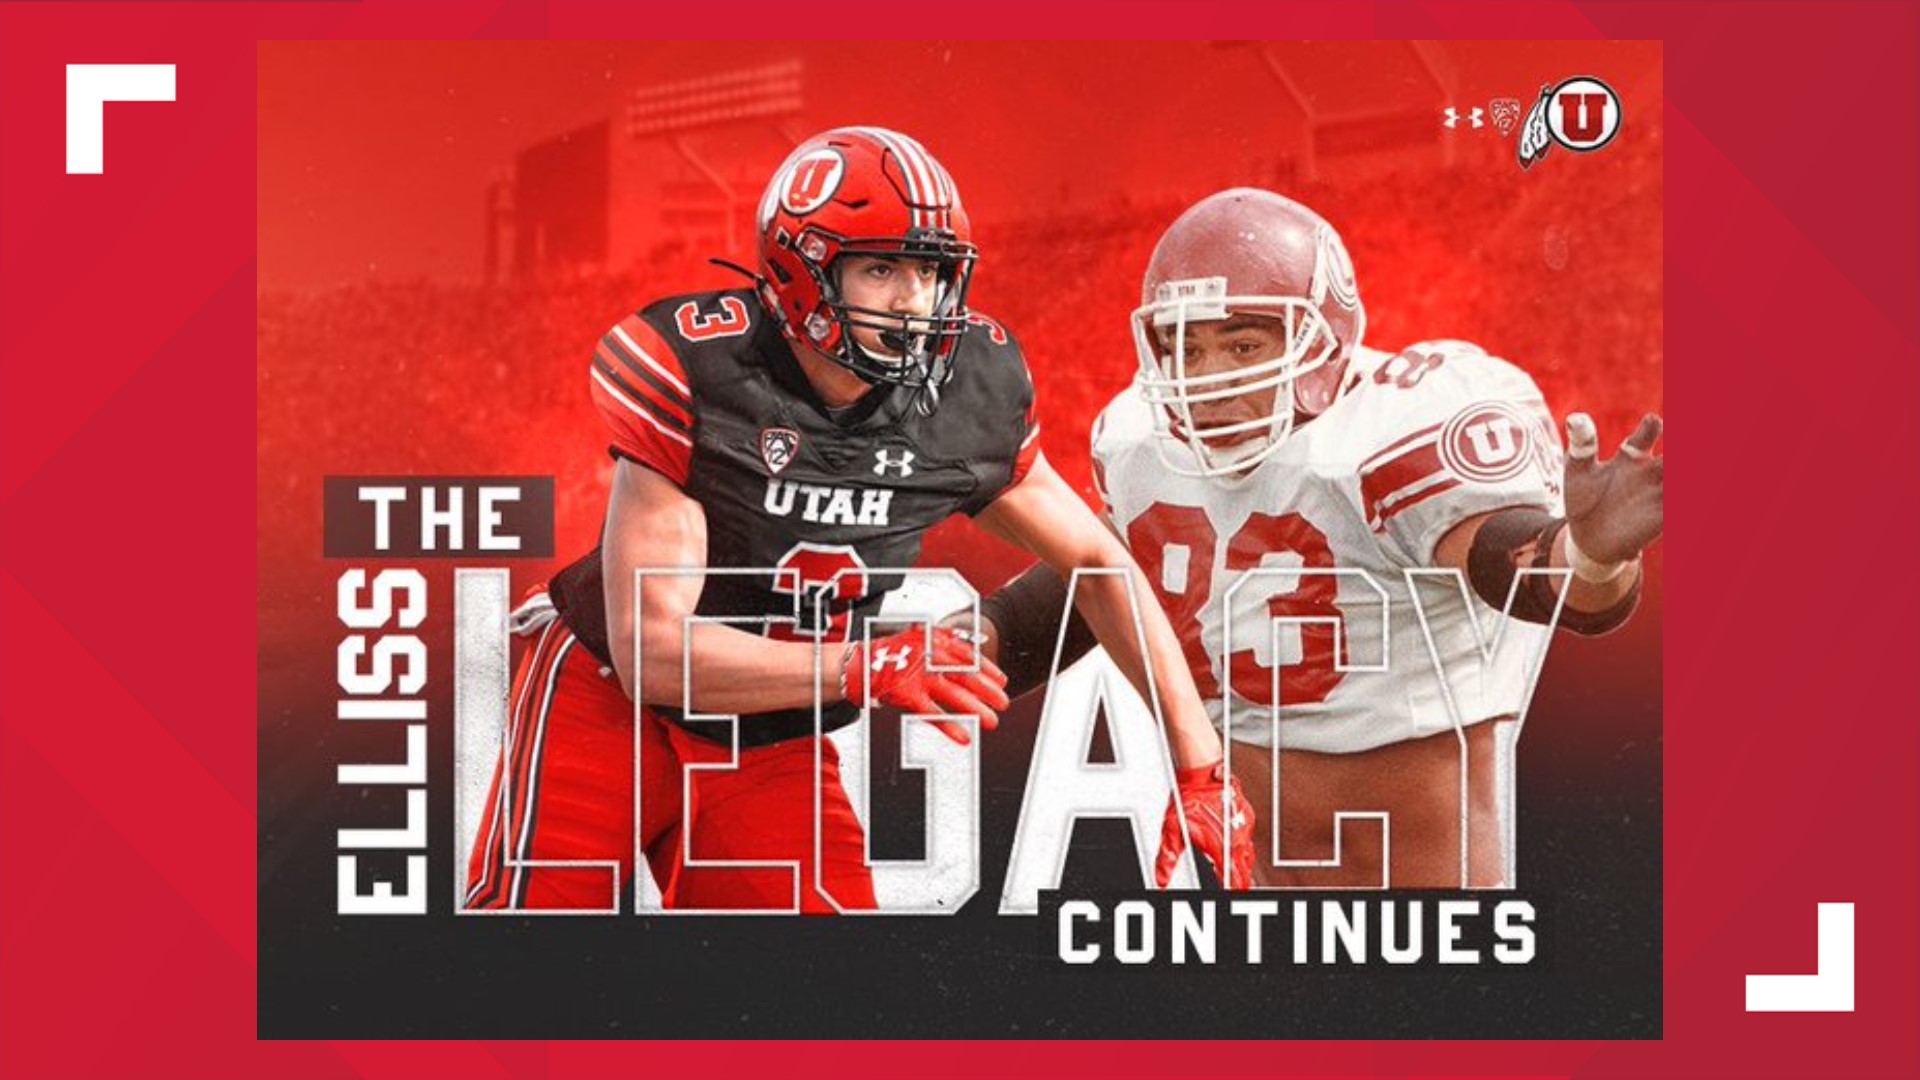 The Elliss family has made a name for itself in football. Jonah's dream is to play in the NFL like his dad, who went to Utah, and his brother Kaden.